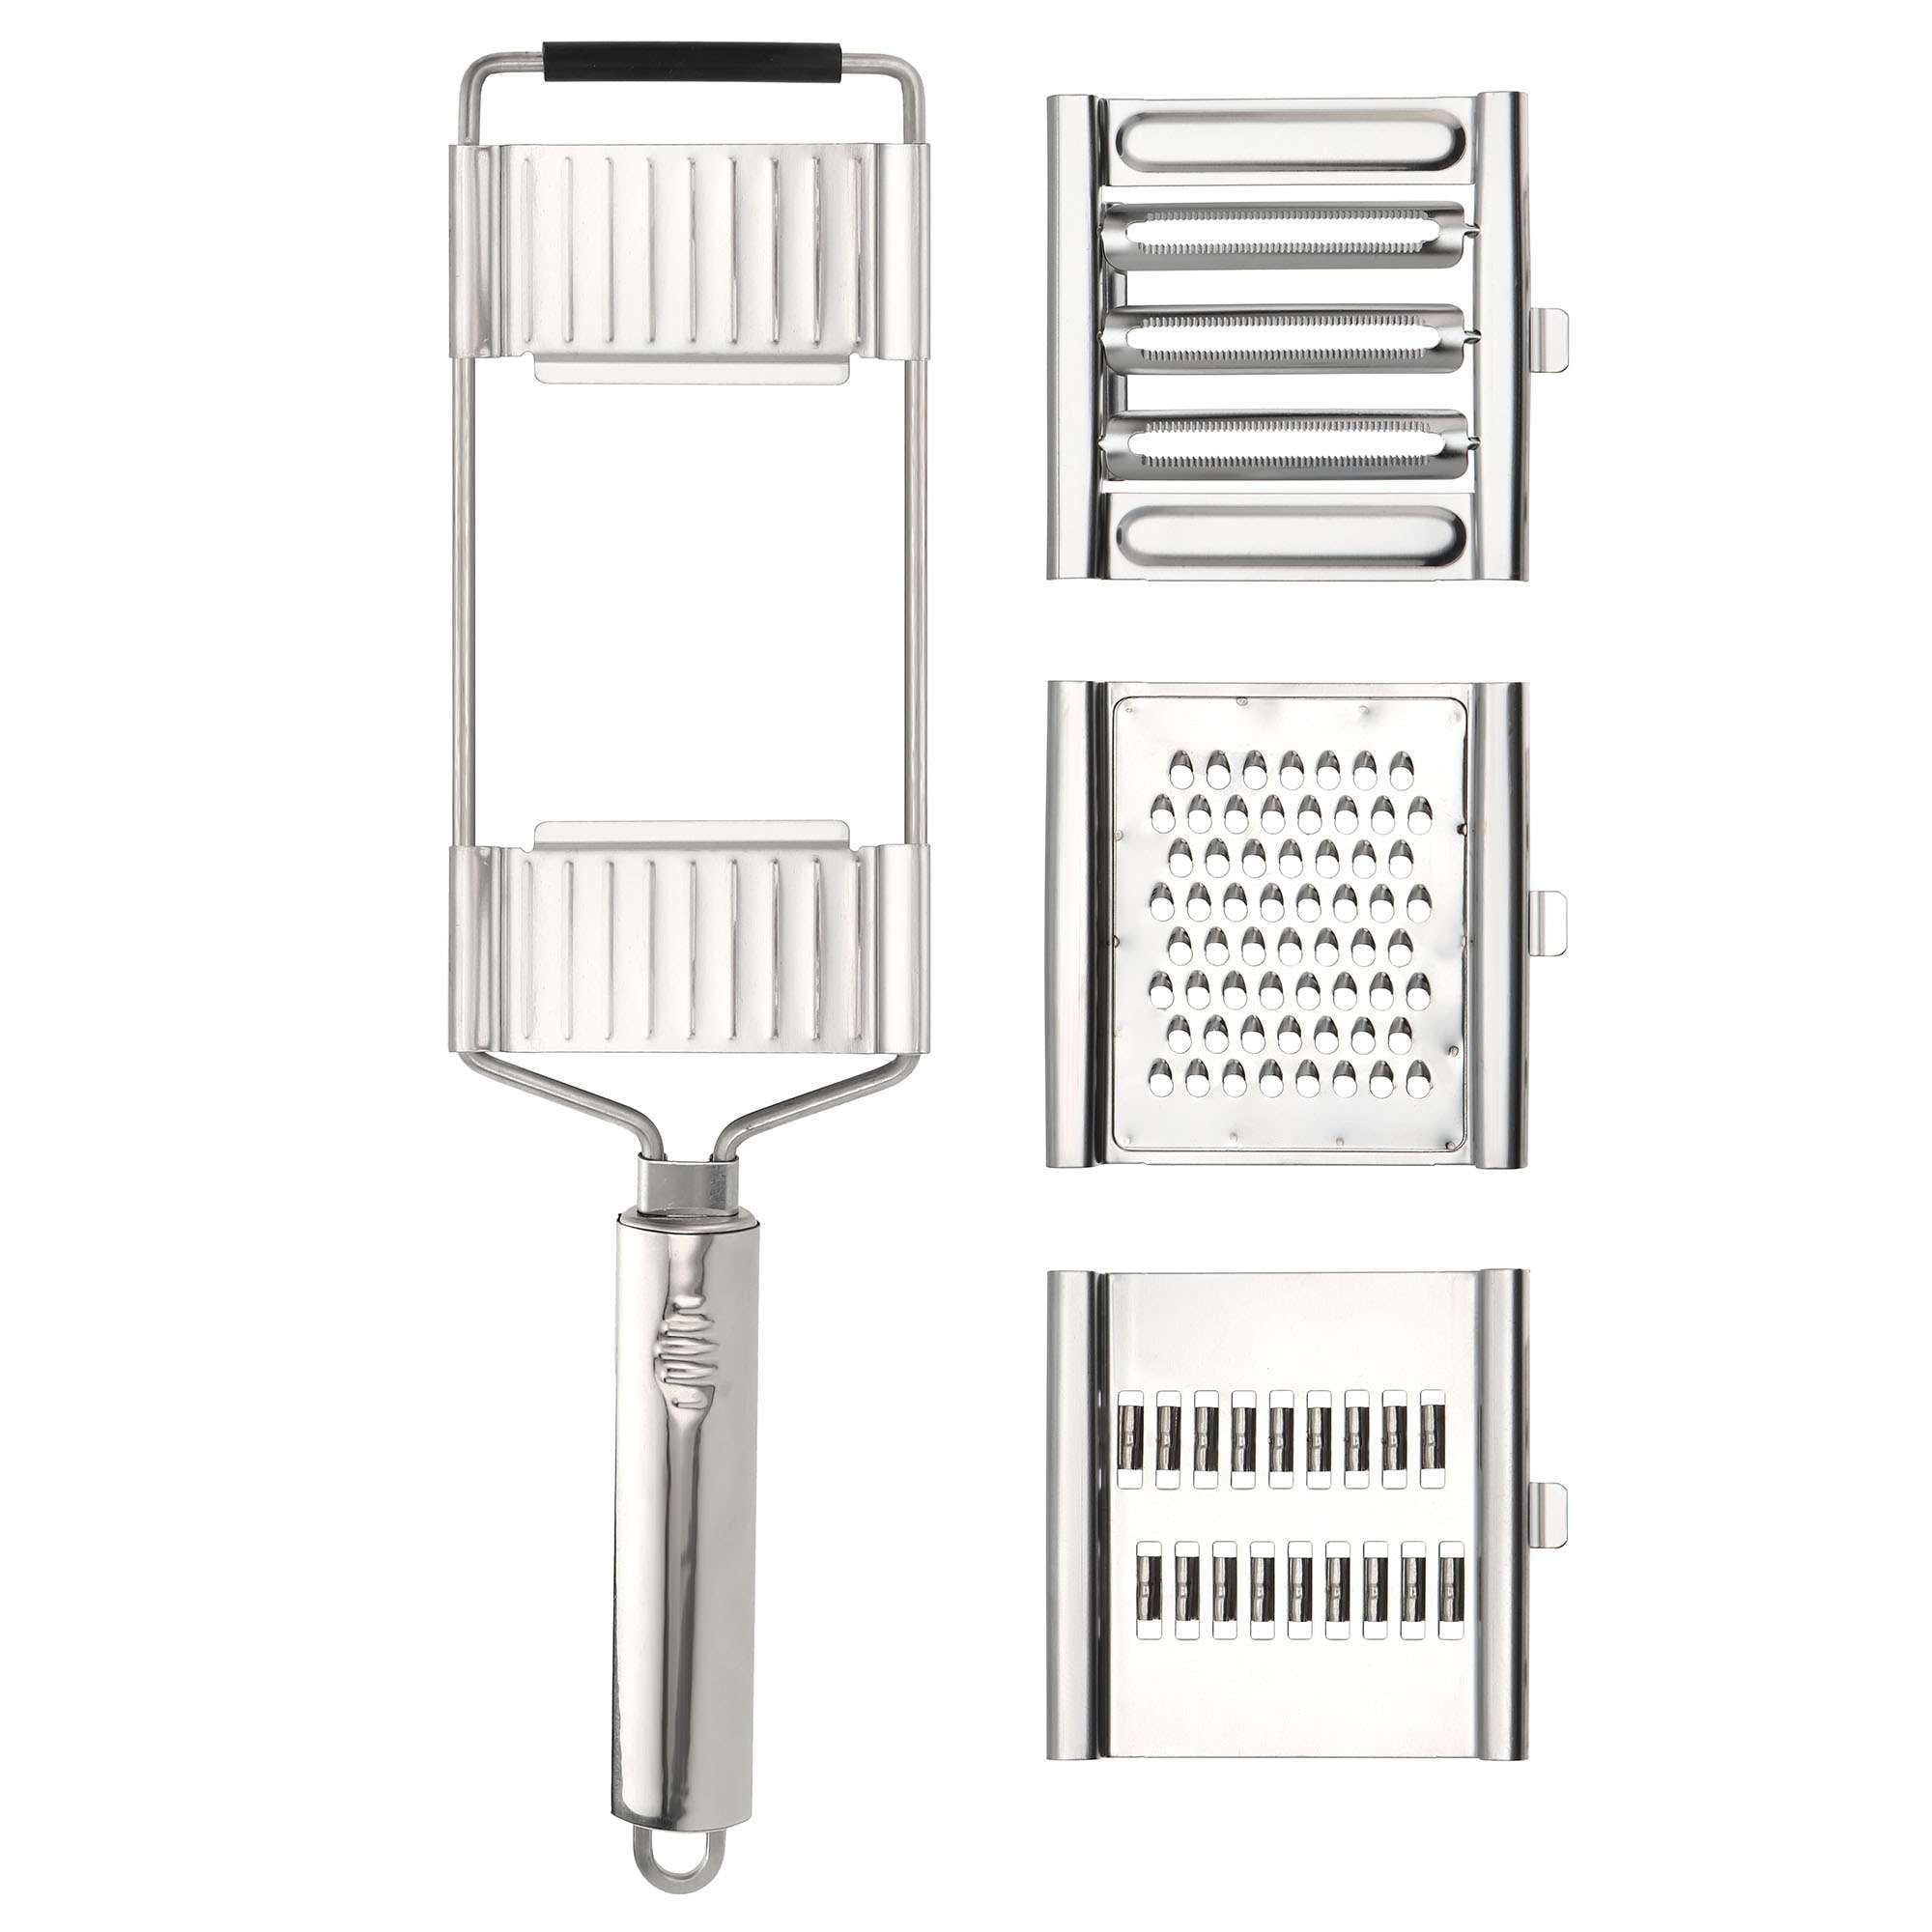 1 X Heavy Duty Stainless Steel Cheese Slicer Cutter Grater Handheld Kitchen  Tool, 1 - Fry's Food Stores